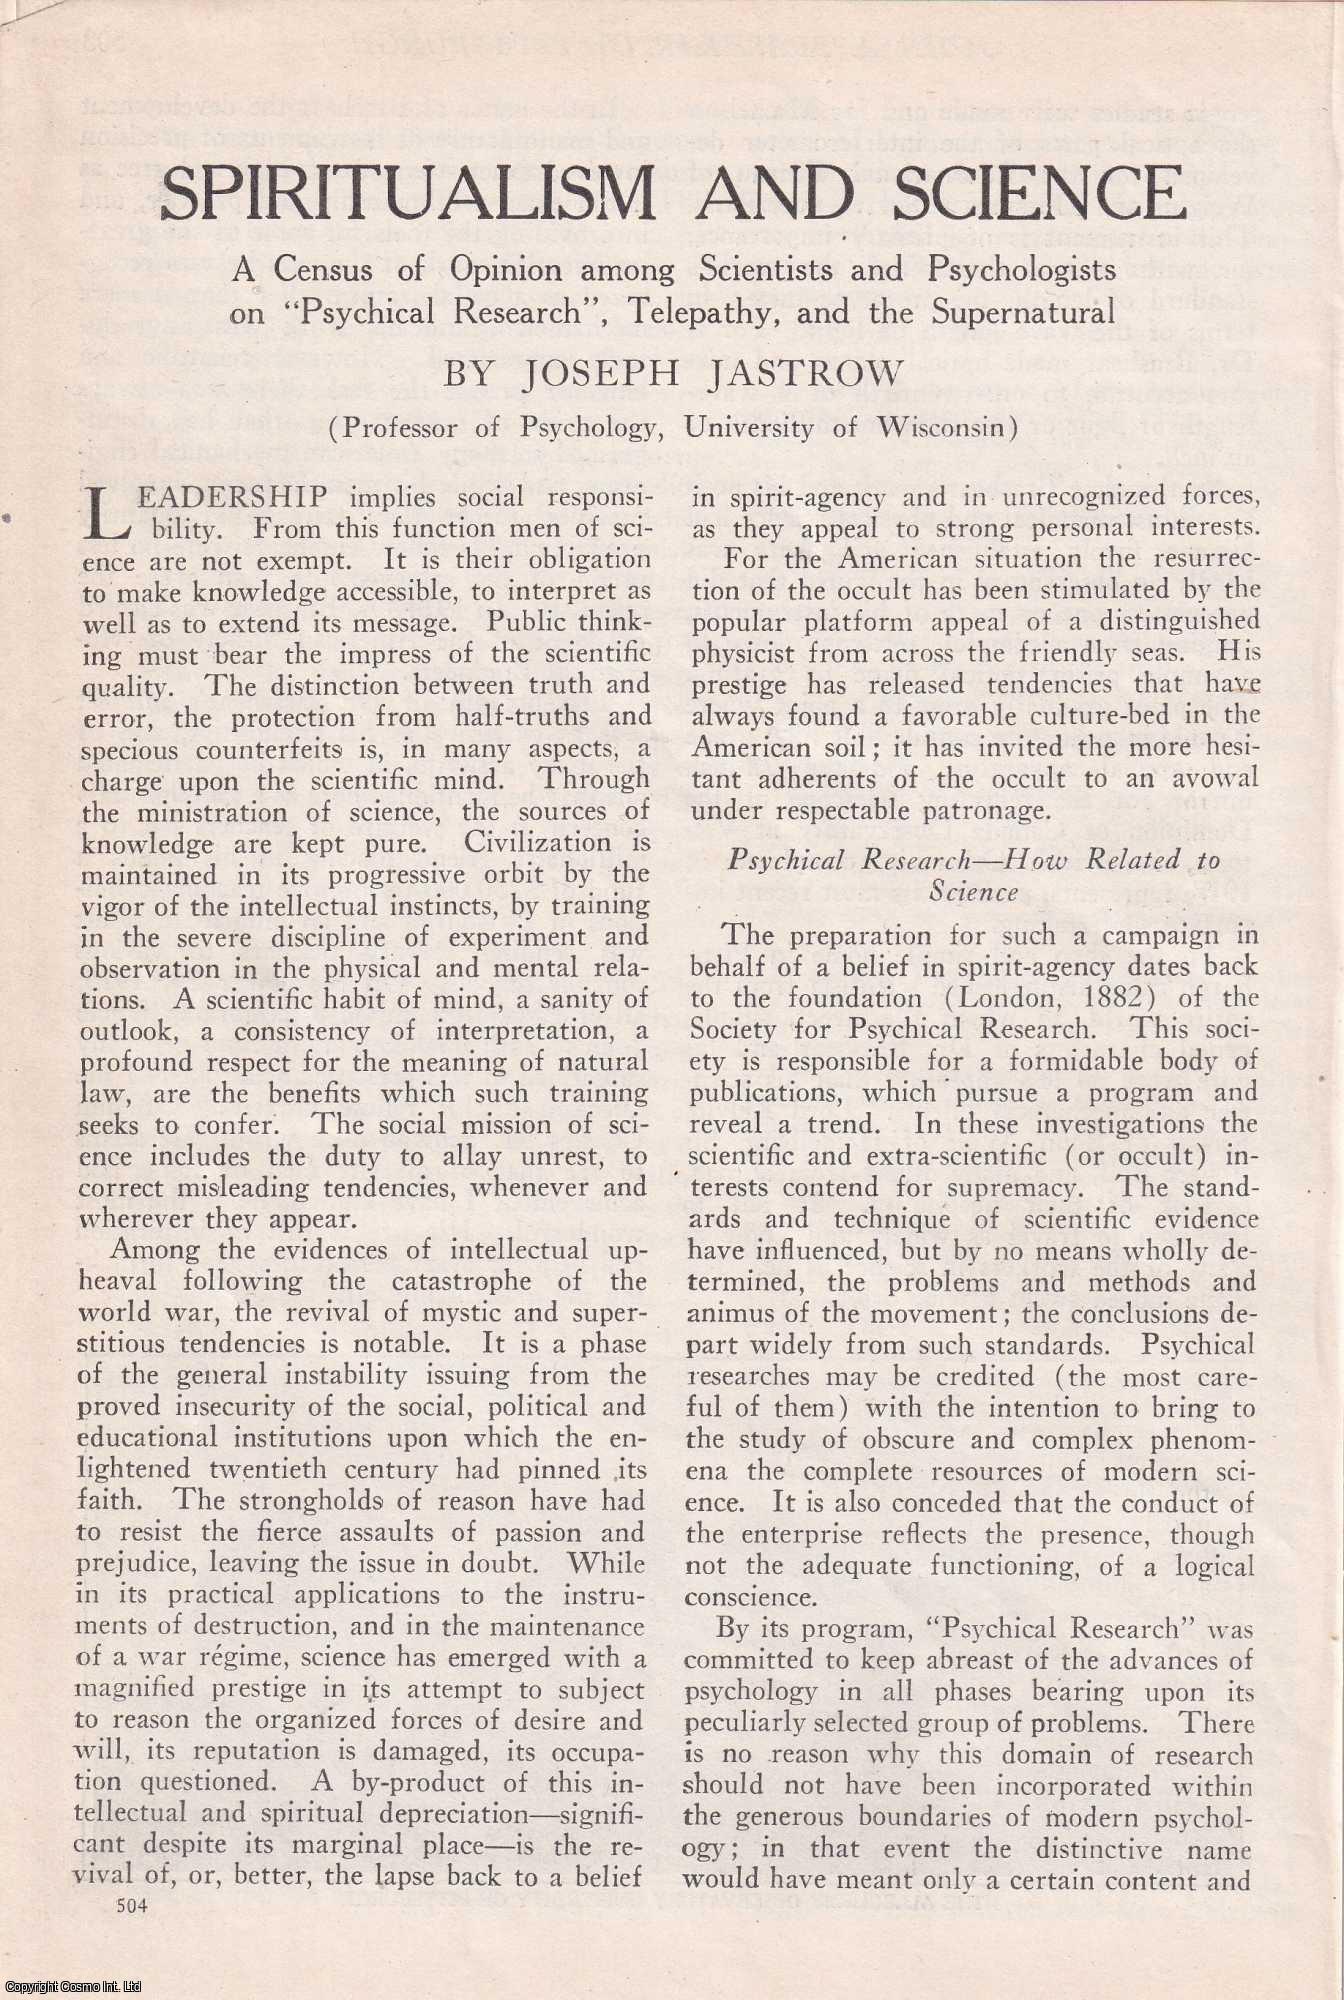 Joseph Jastrow, Prof. of Psychology, Univ. of Wisconsin - Spiritualism and Science. A Census of Opinion among Scientists and Psychologists on Psychical Research, Telepathy, and the Supernatural. An original article from the American Review of Reviews, 1920.